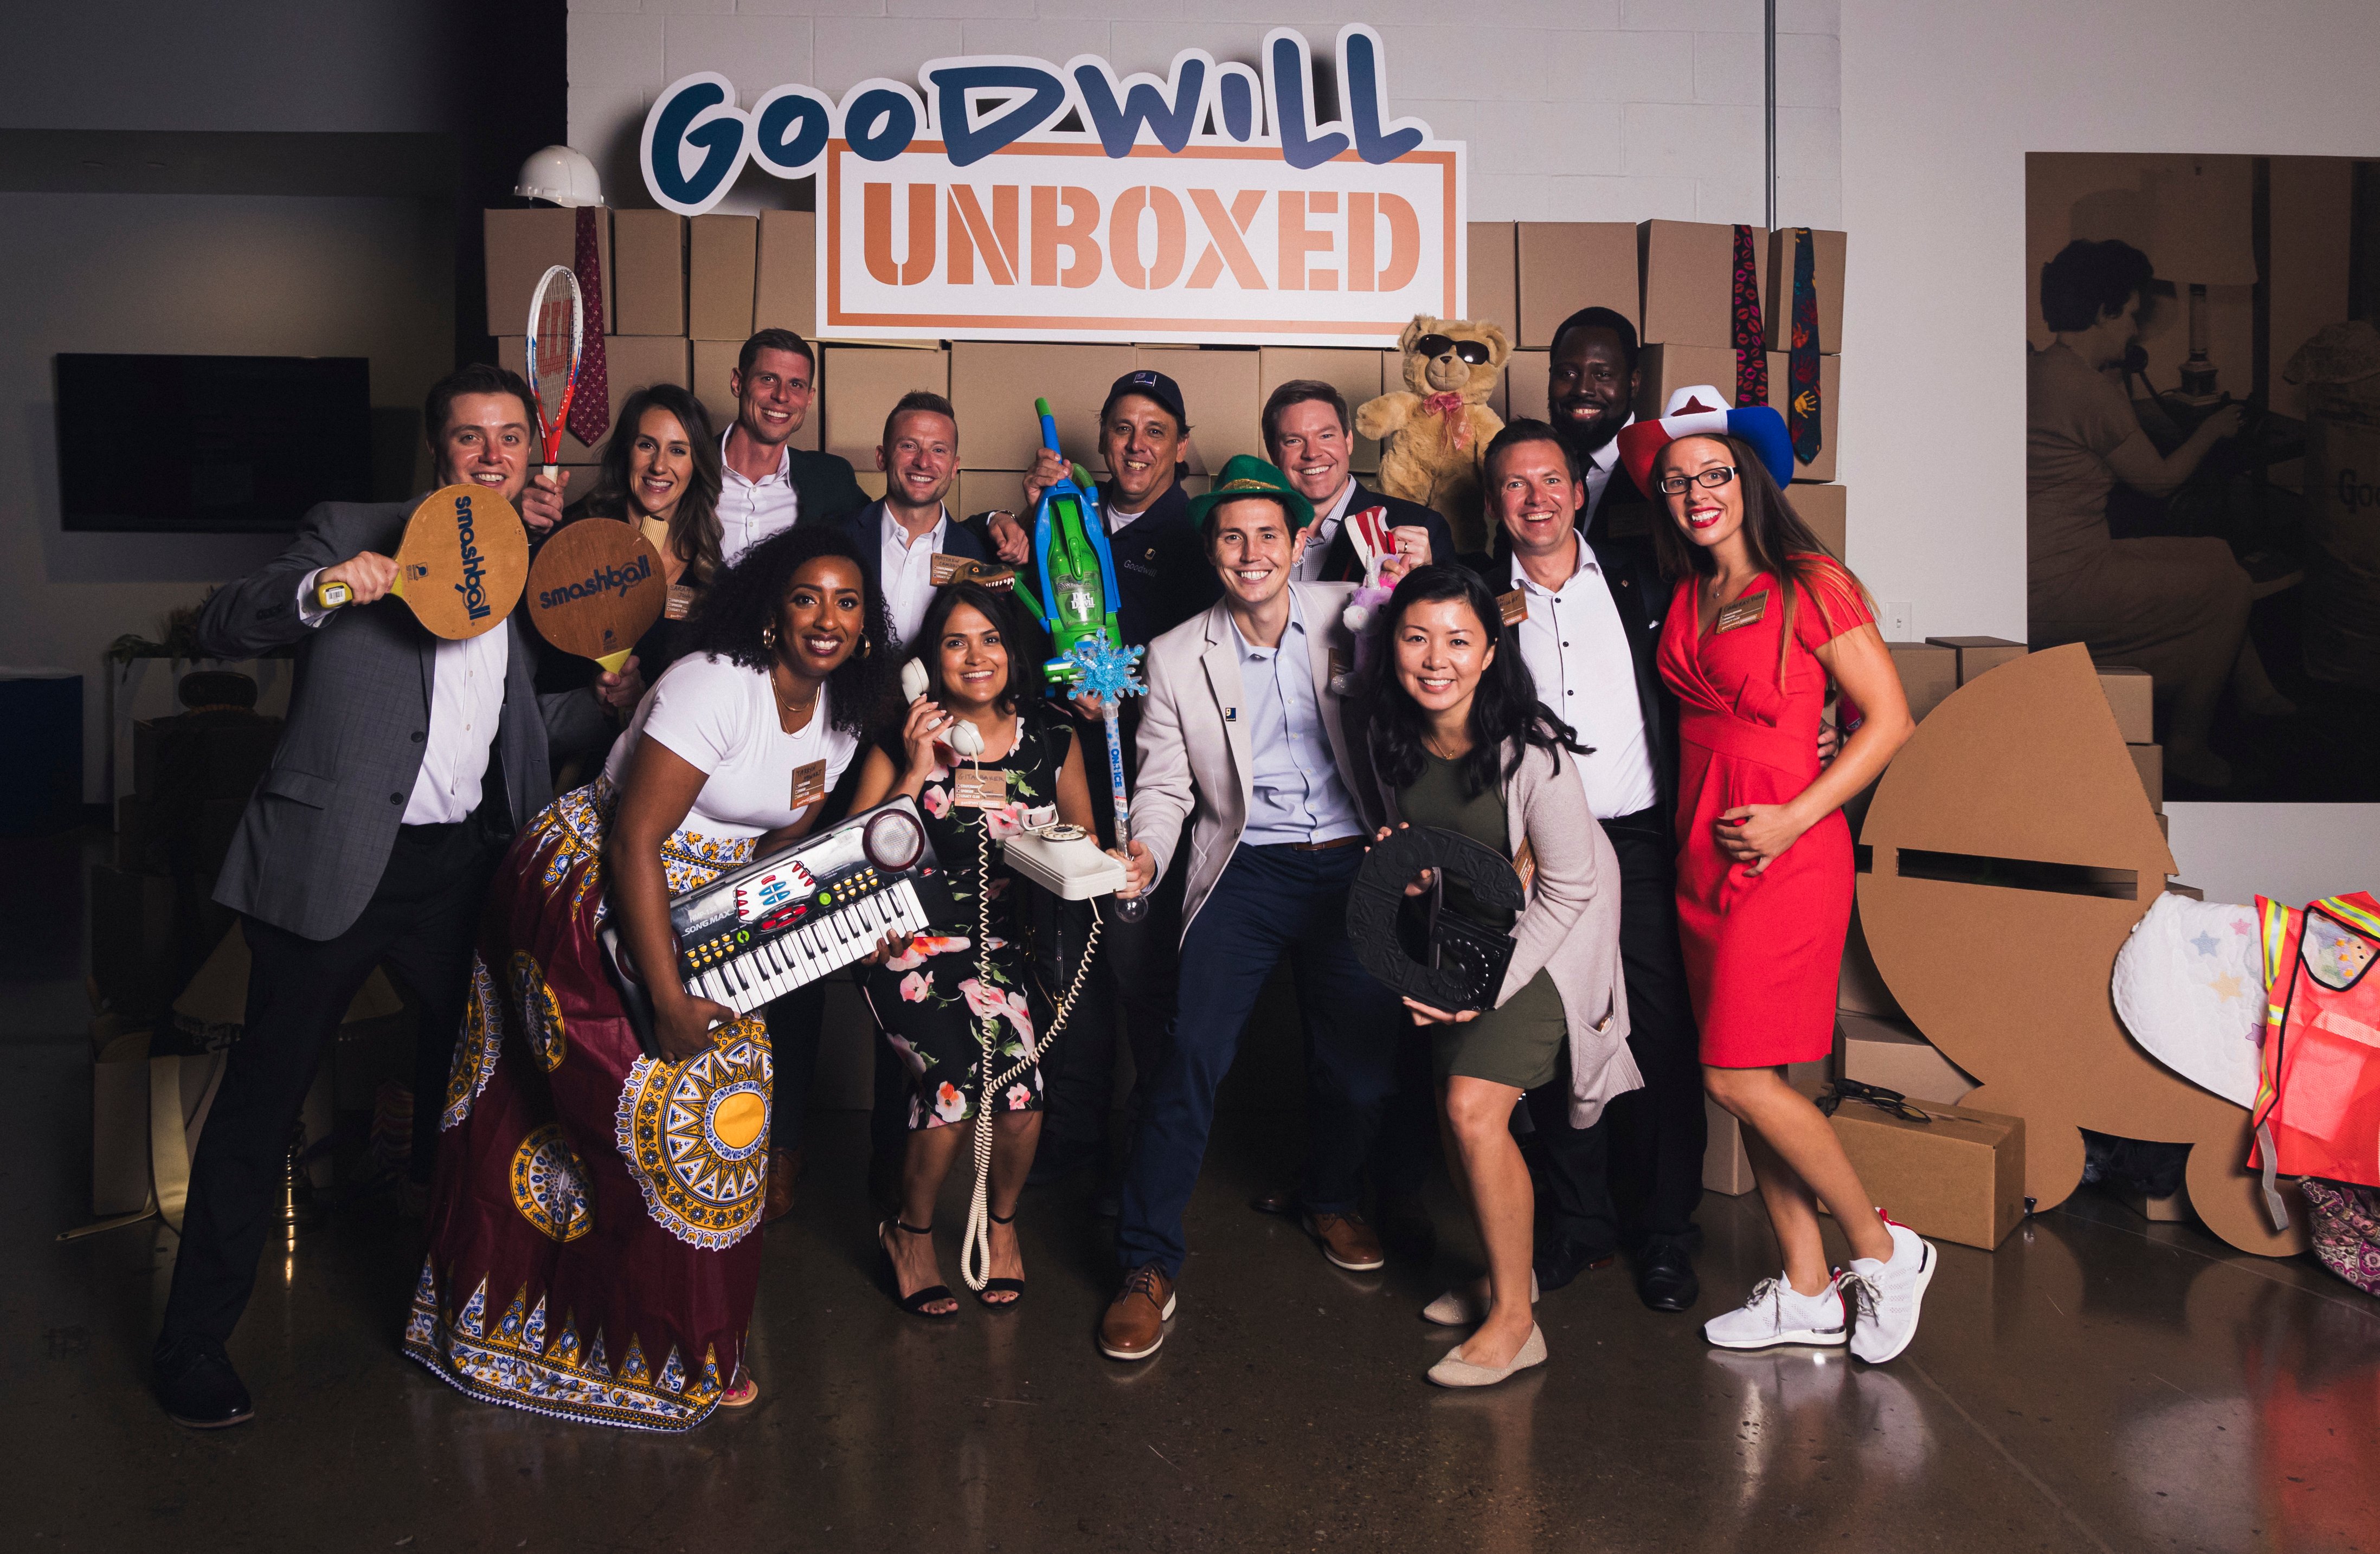 Goodwill_Unboxed_2364-1